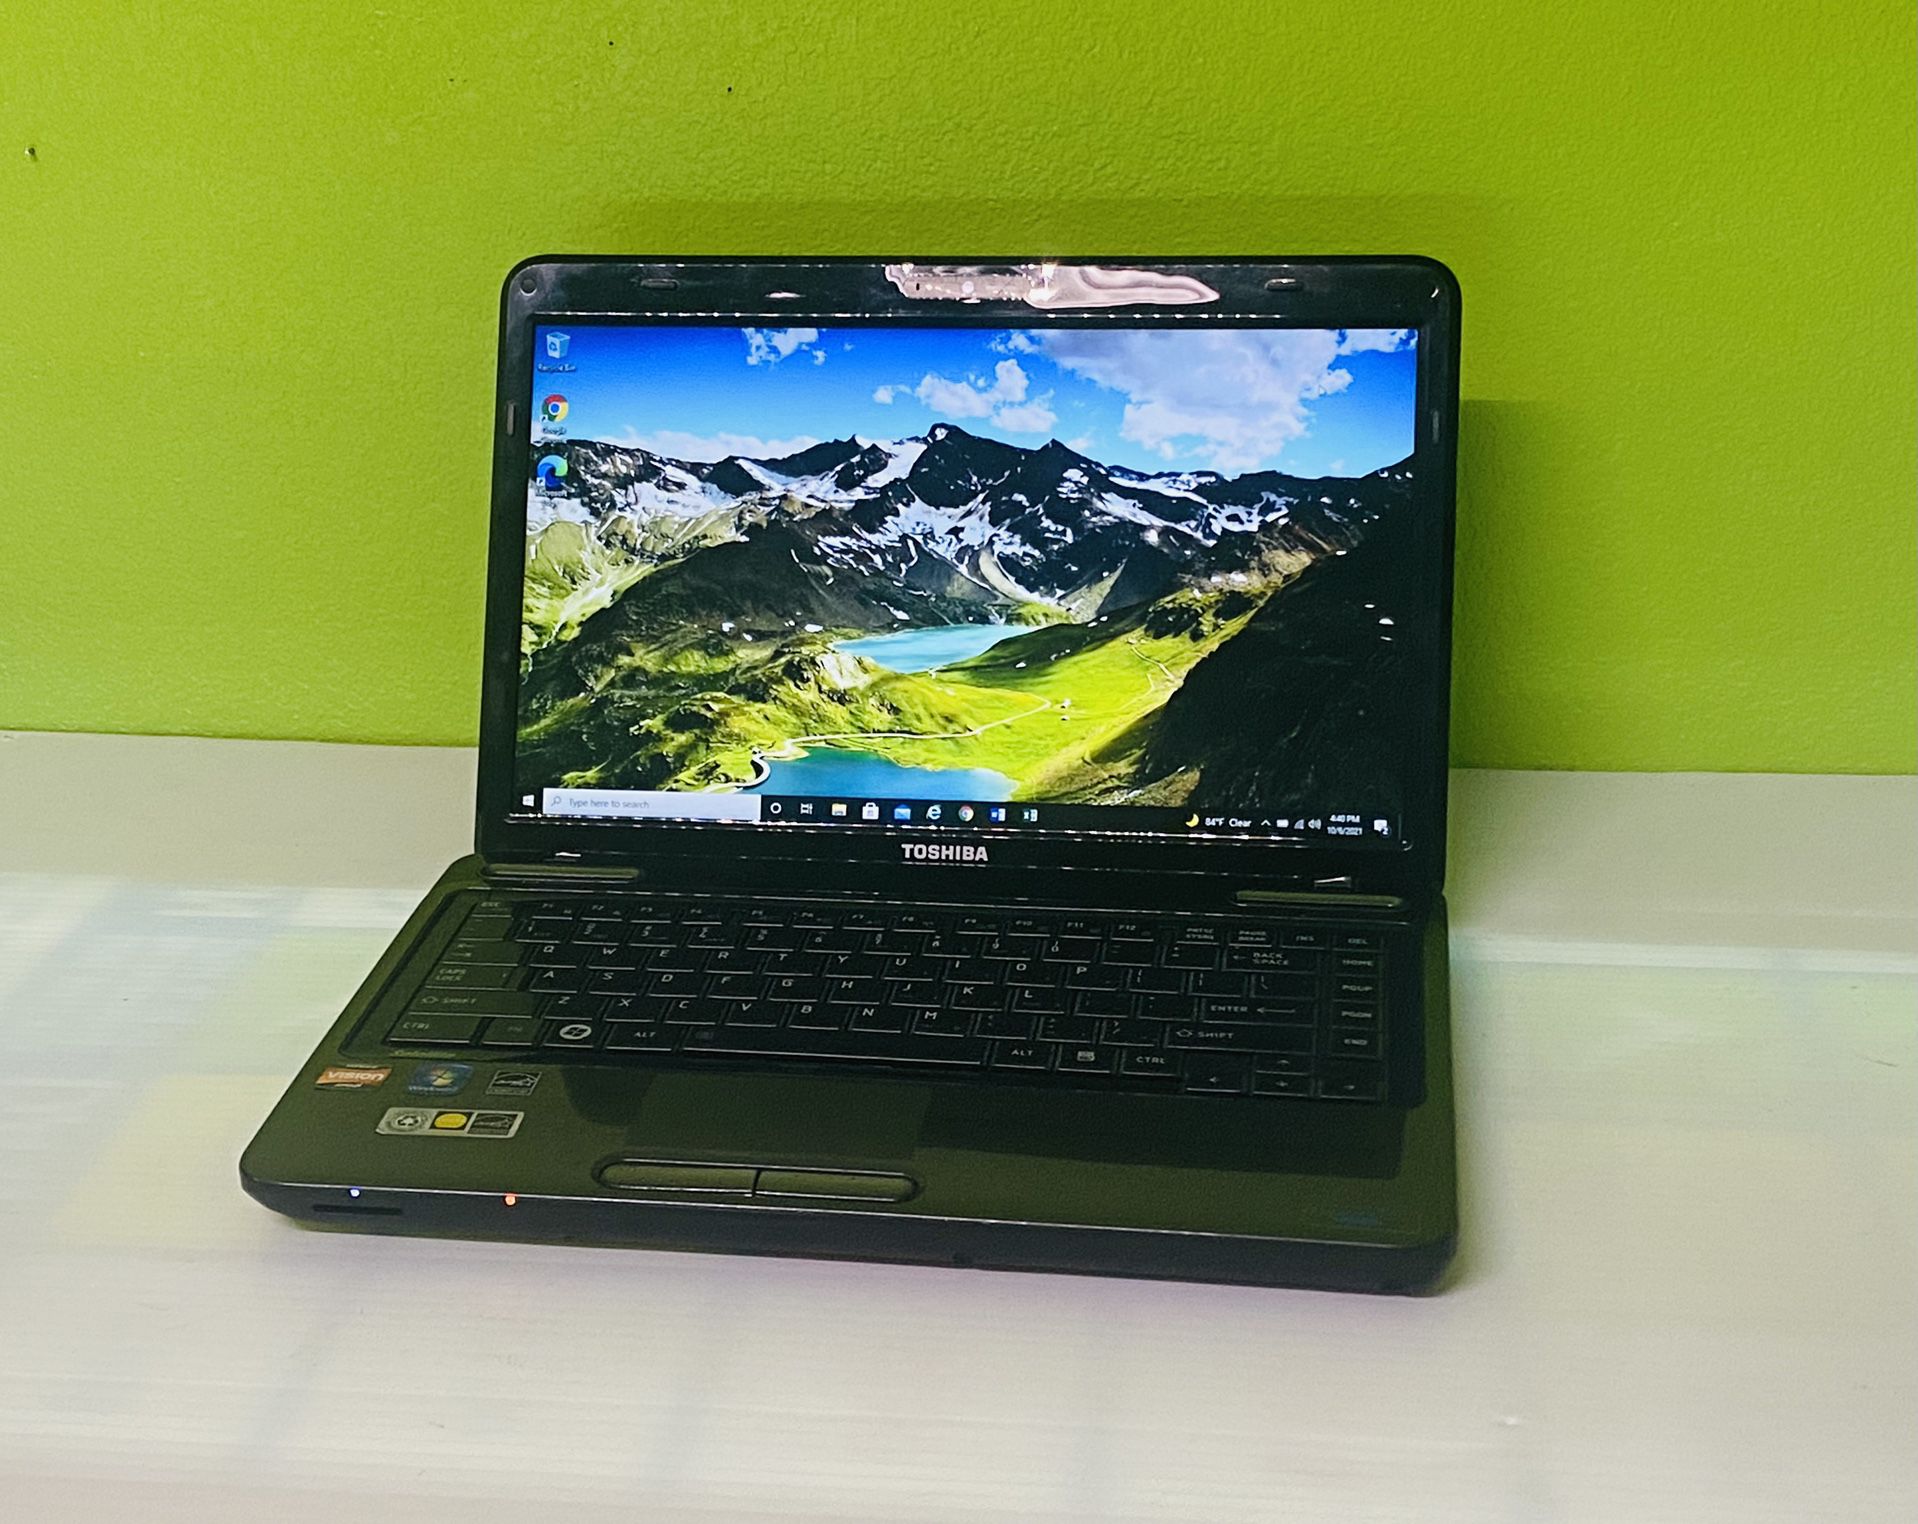 🎊CHEAP LAPTOP ON SALE TODAY 🎊 $149😳